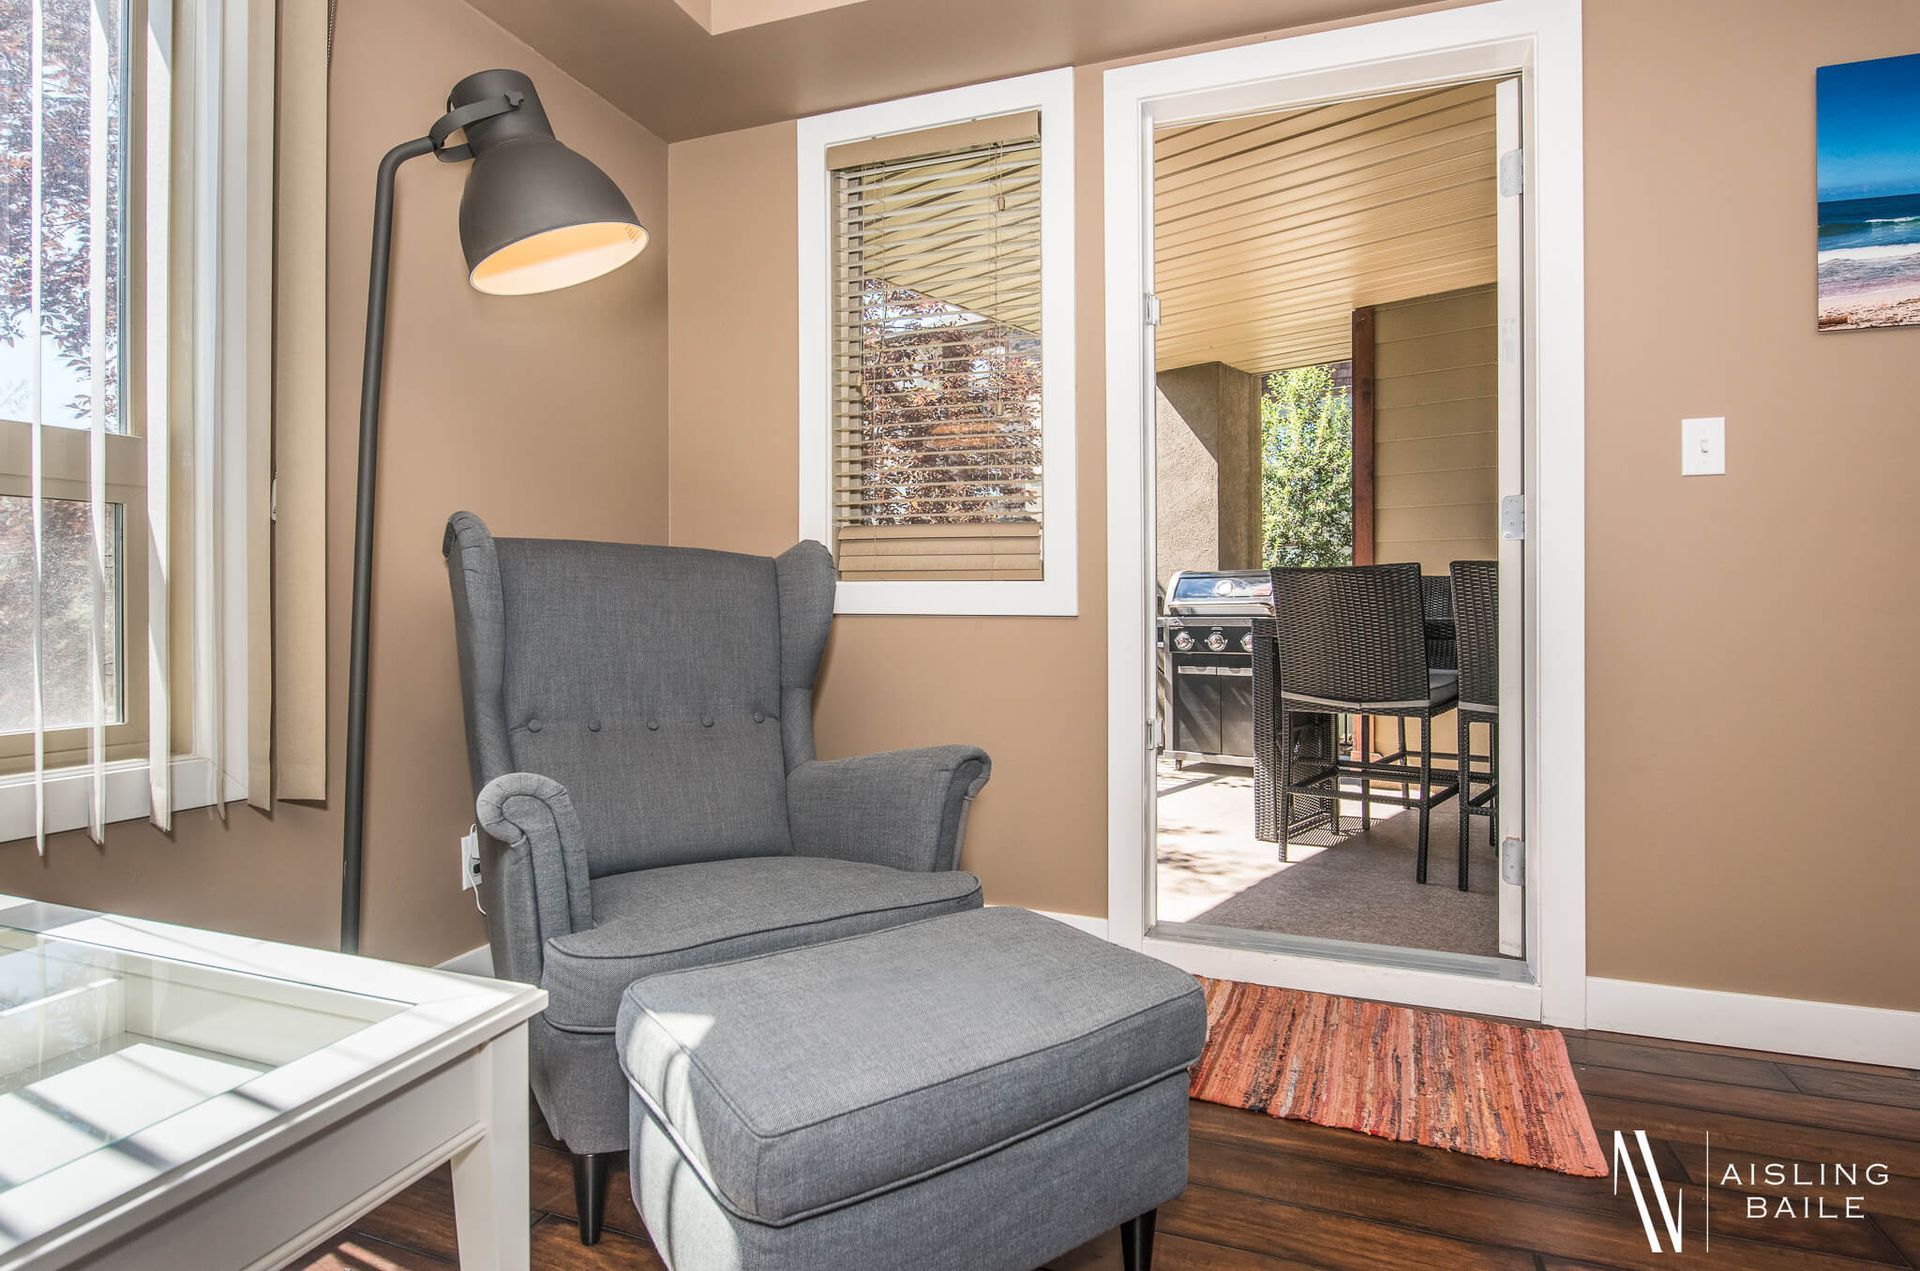 Living room chair and patio entrance of the Stylish condo of Lake Windermere Pointe in Invermere, a BC Vacation Rental hosted by Aisling Baile Property Management.